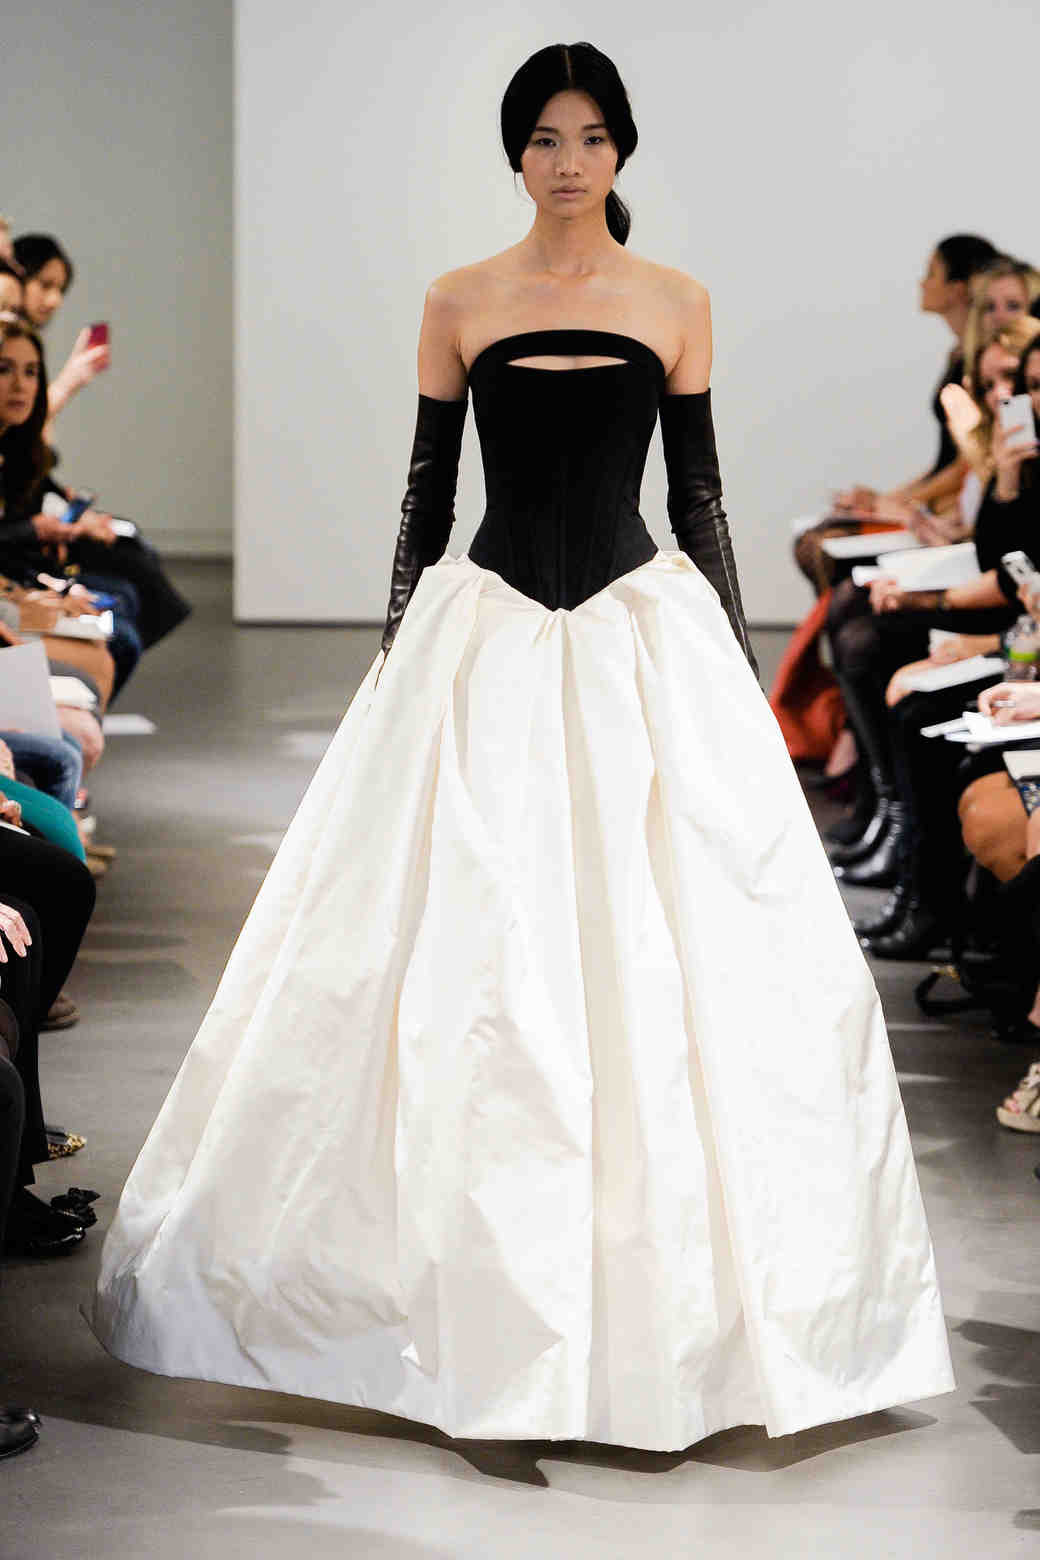 Black And White Wedding Dresses
 Chic Black Wedding Dress for the Edgy Bride